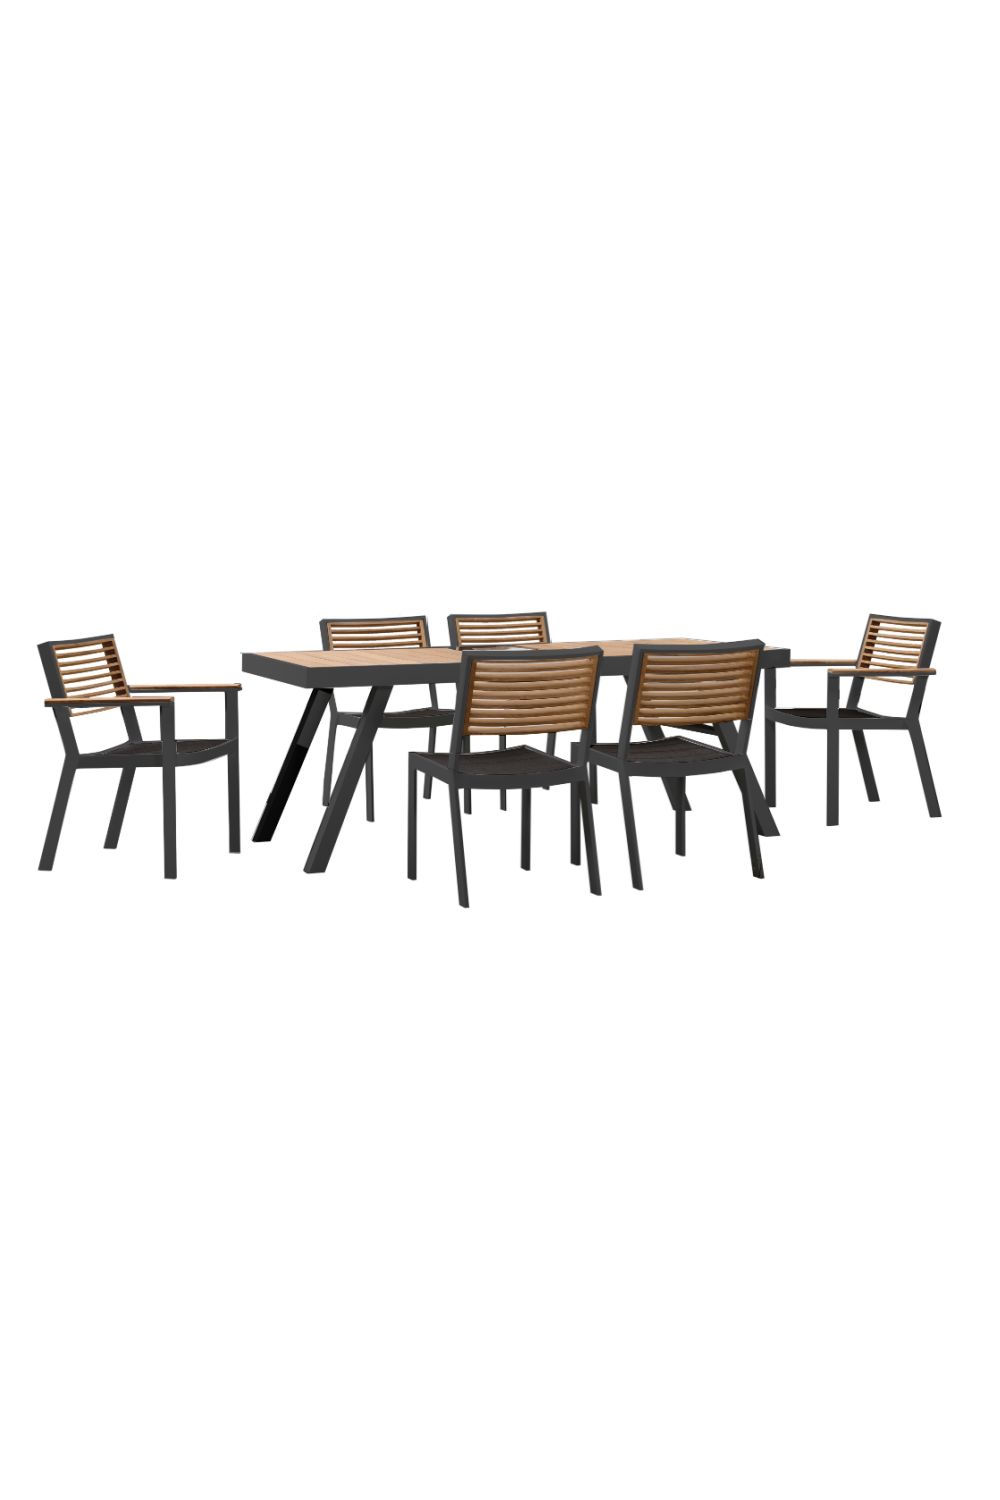 Outdoor Dining Set (6 chairs) | Higold York | OROA.com